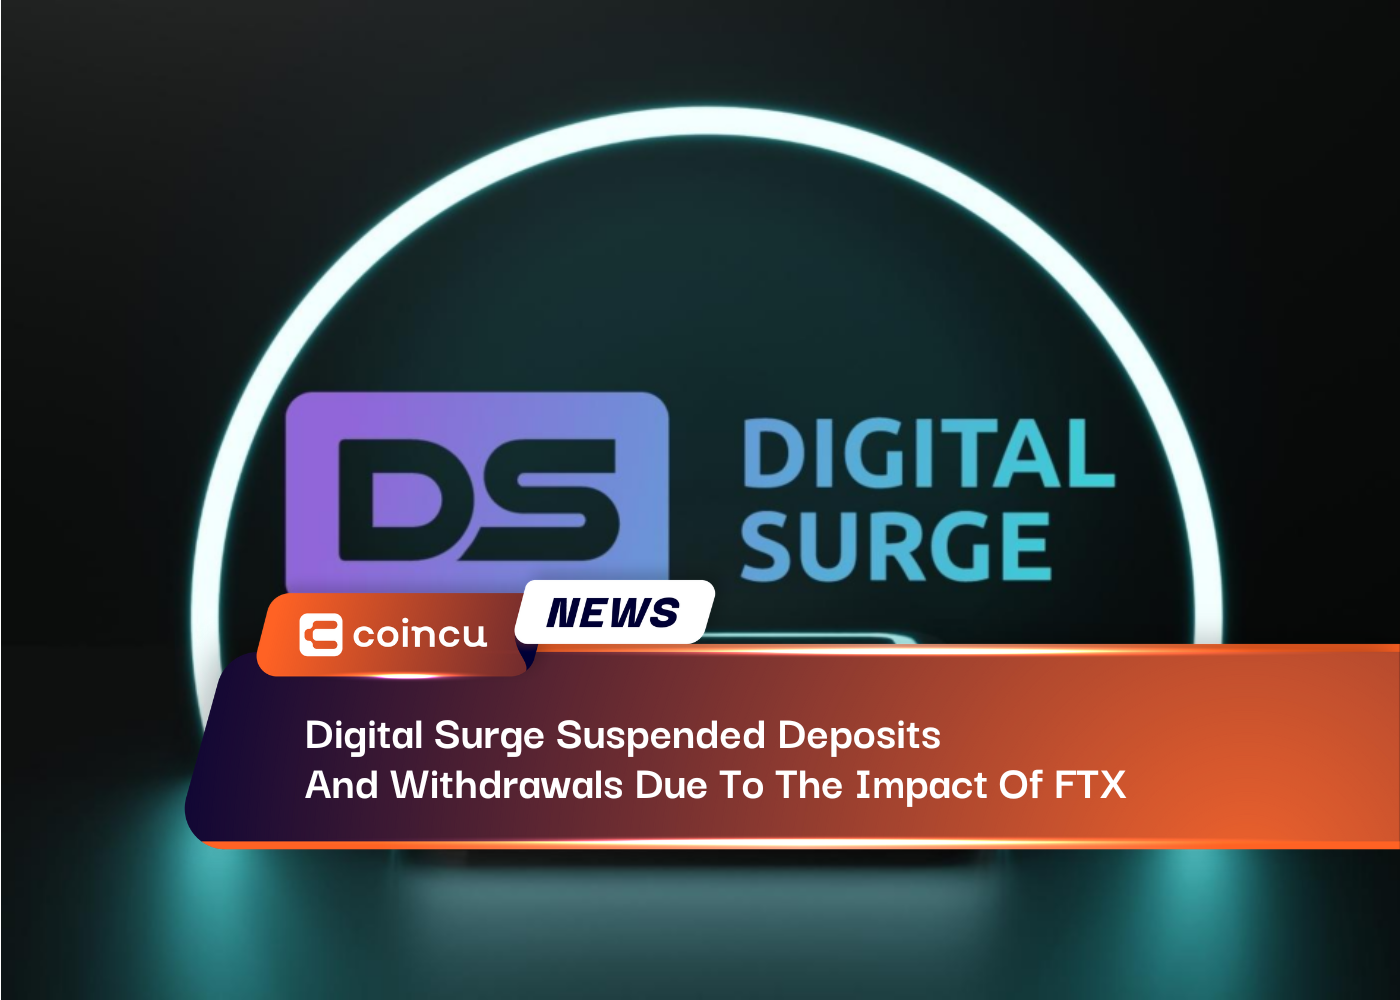 Digital Surge Suspended Deposits And Withdrawals Due To The Impact Of FTX